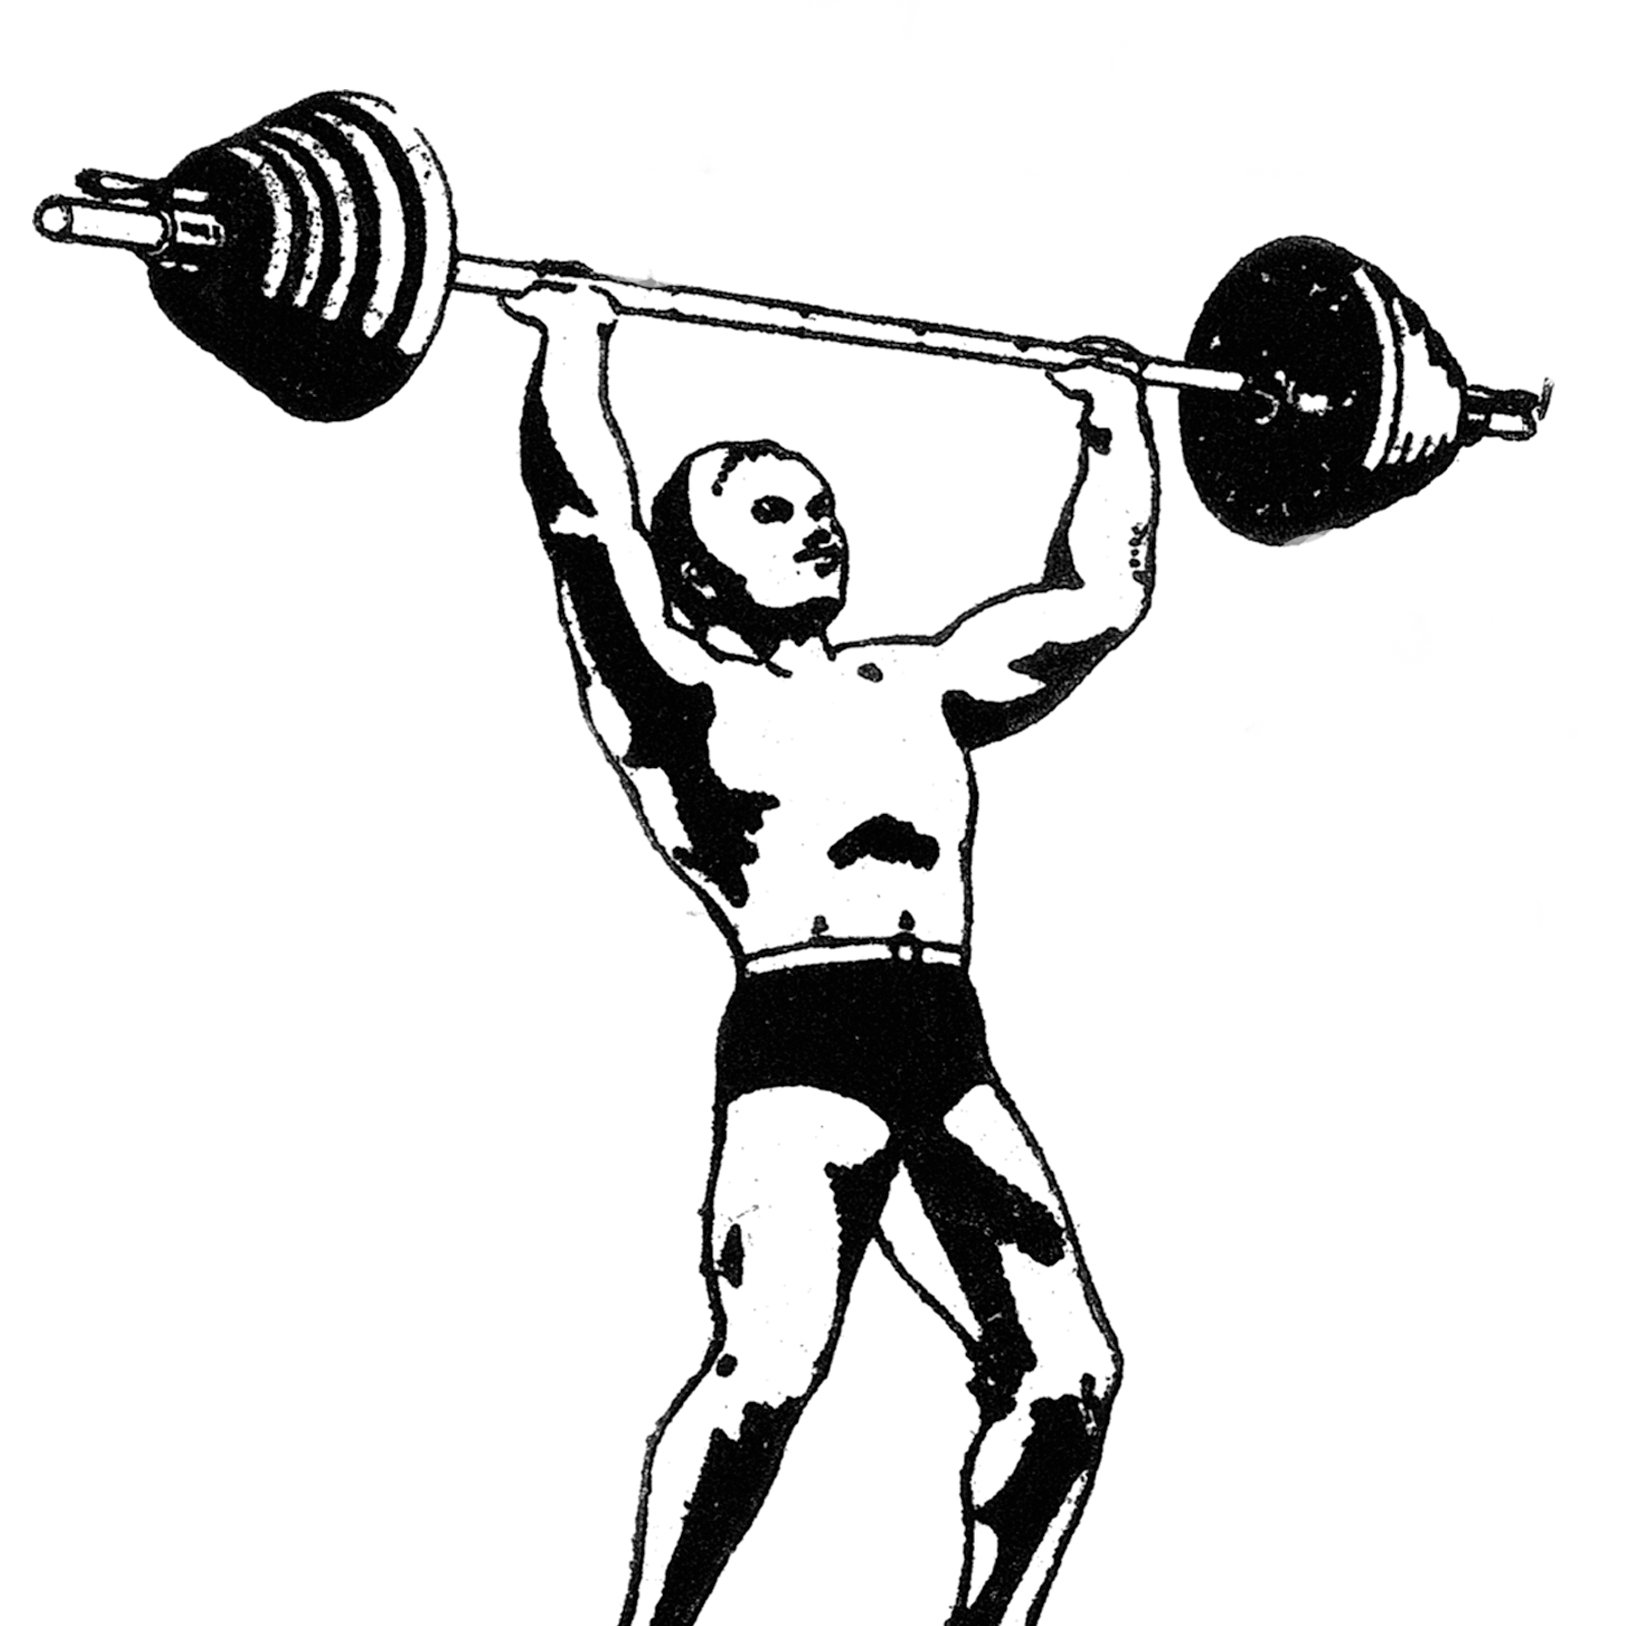 Serious strength training publication covering the best of the past and present. Where a one-hand clean & jerk is considered a grip strength exercise.